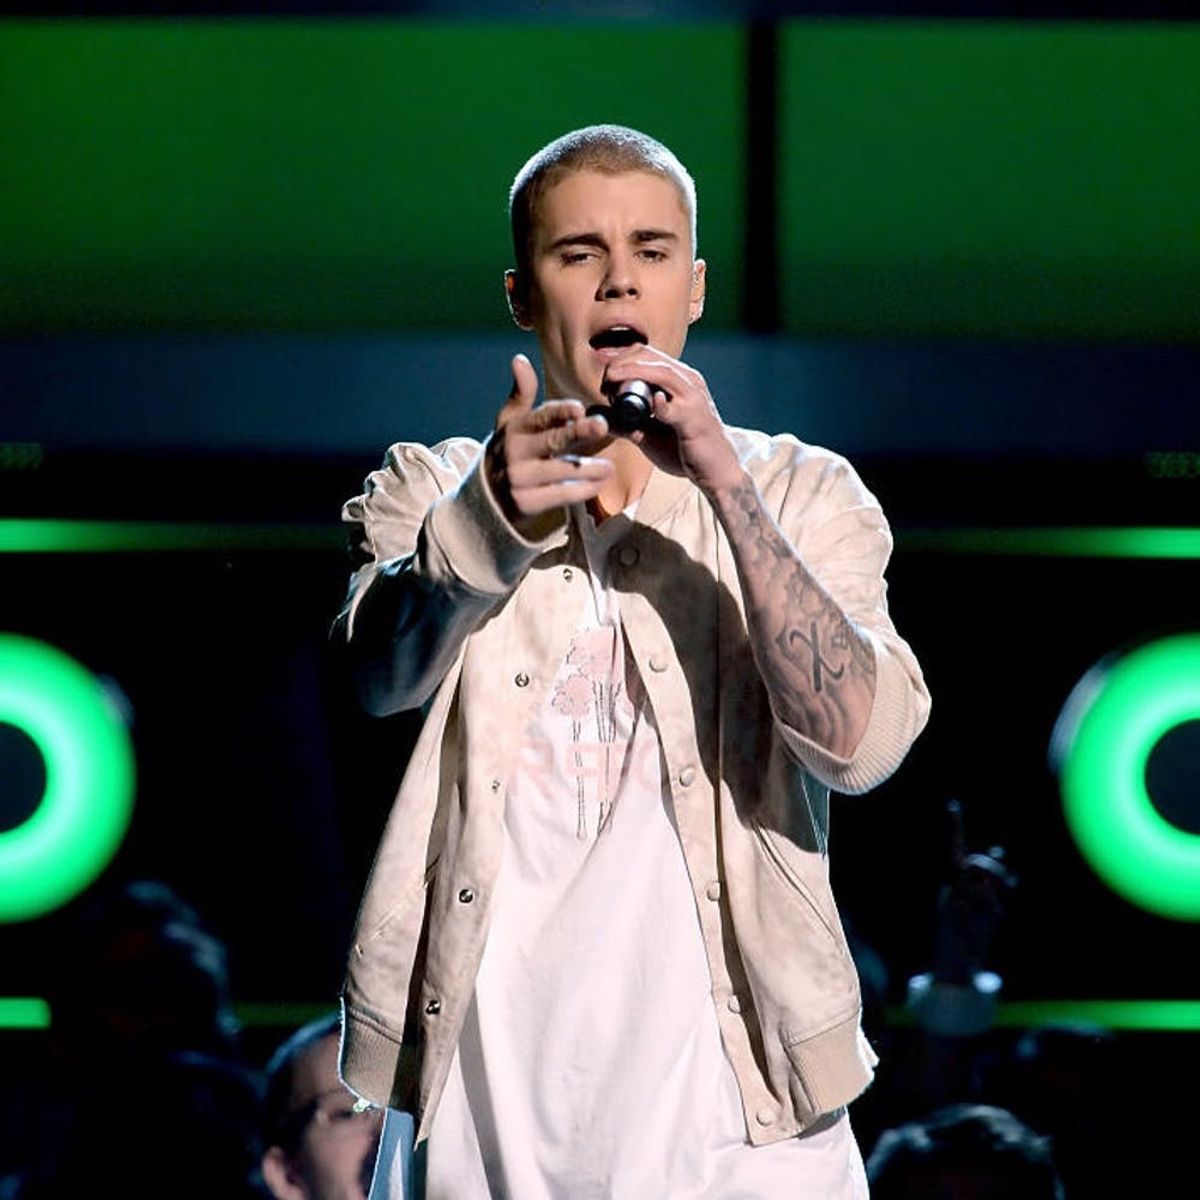 Justin Bieber Canceled the Remainder of His Purpose World Tour